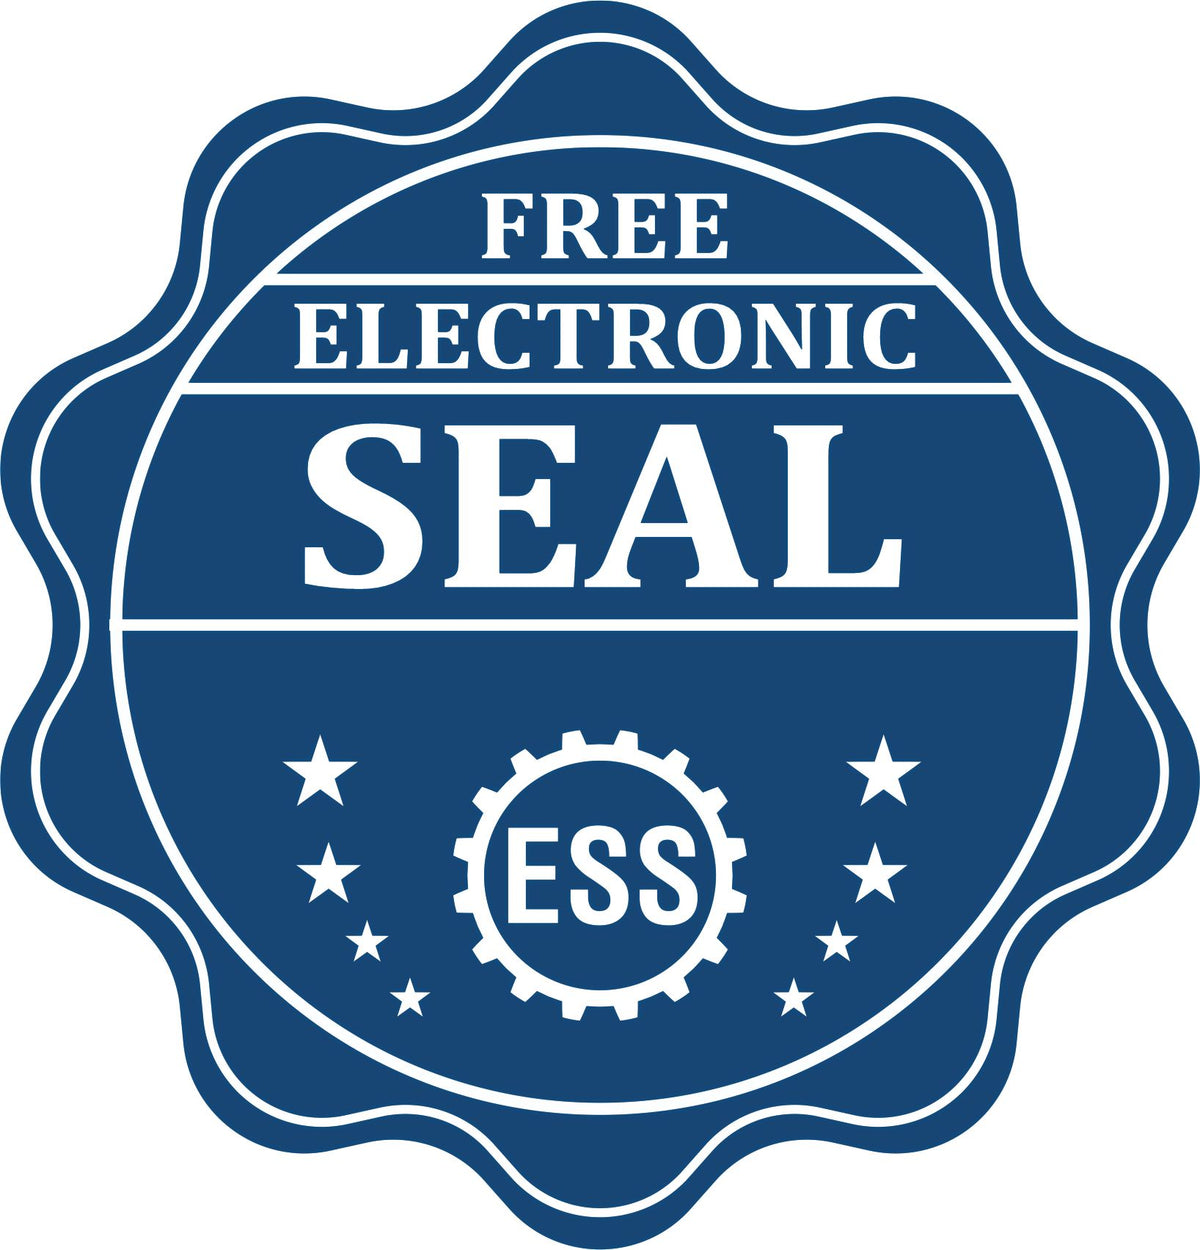 A badge showing a free electronic seal for the Hybrid Georgia Architect Seal with stars and the ESS gear on the emblem.